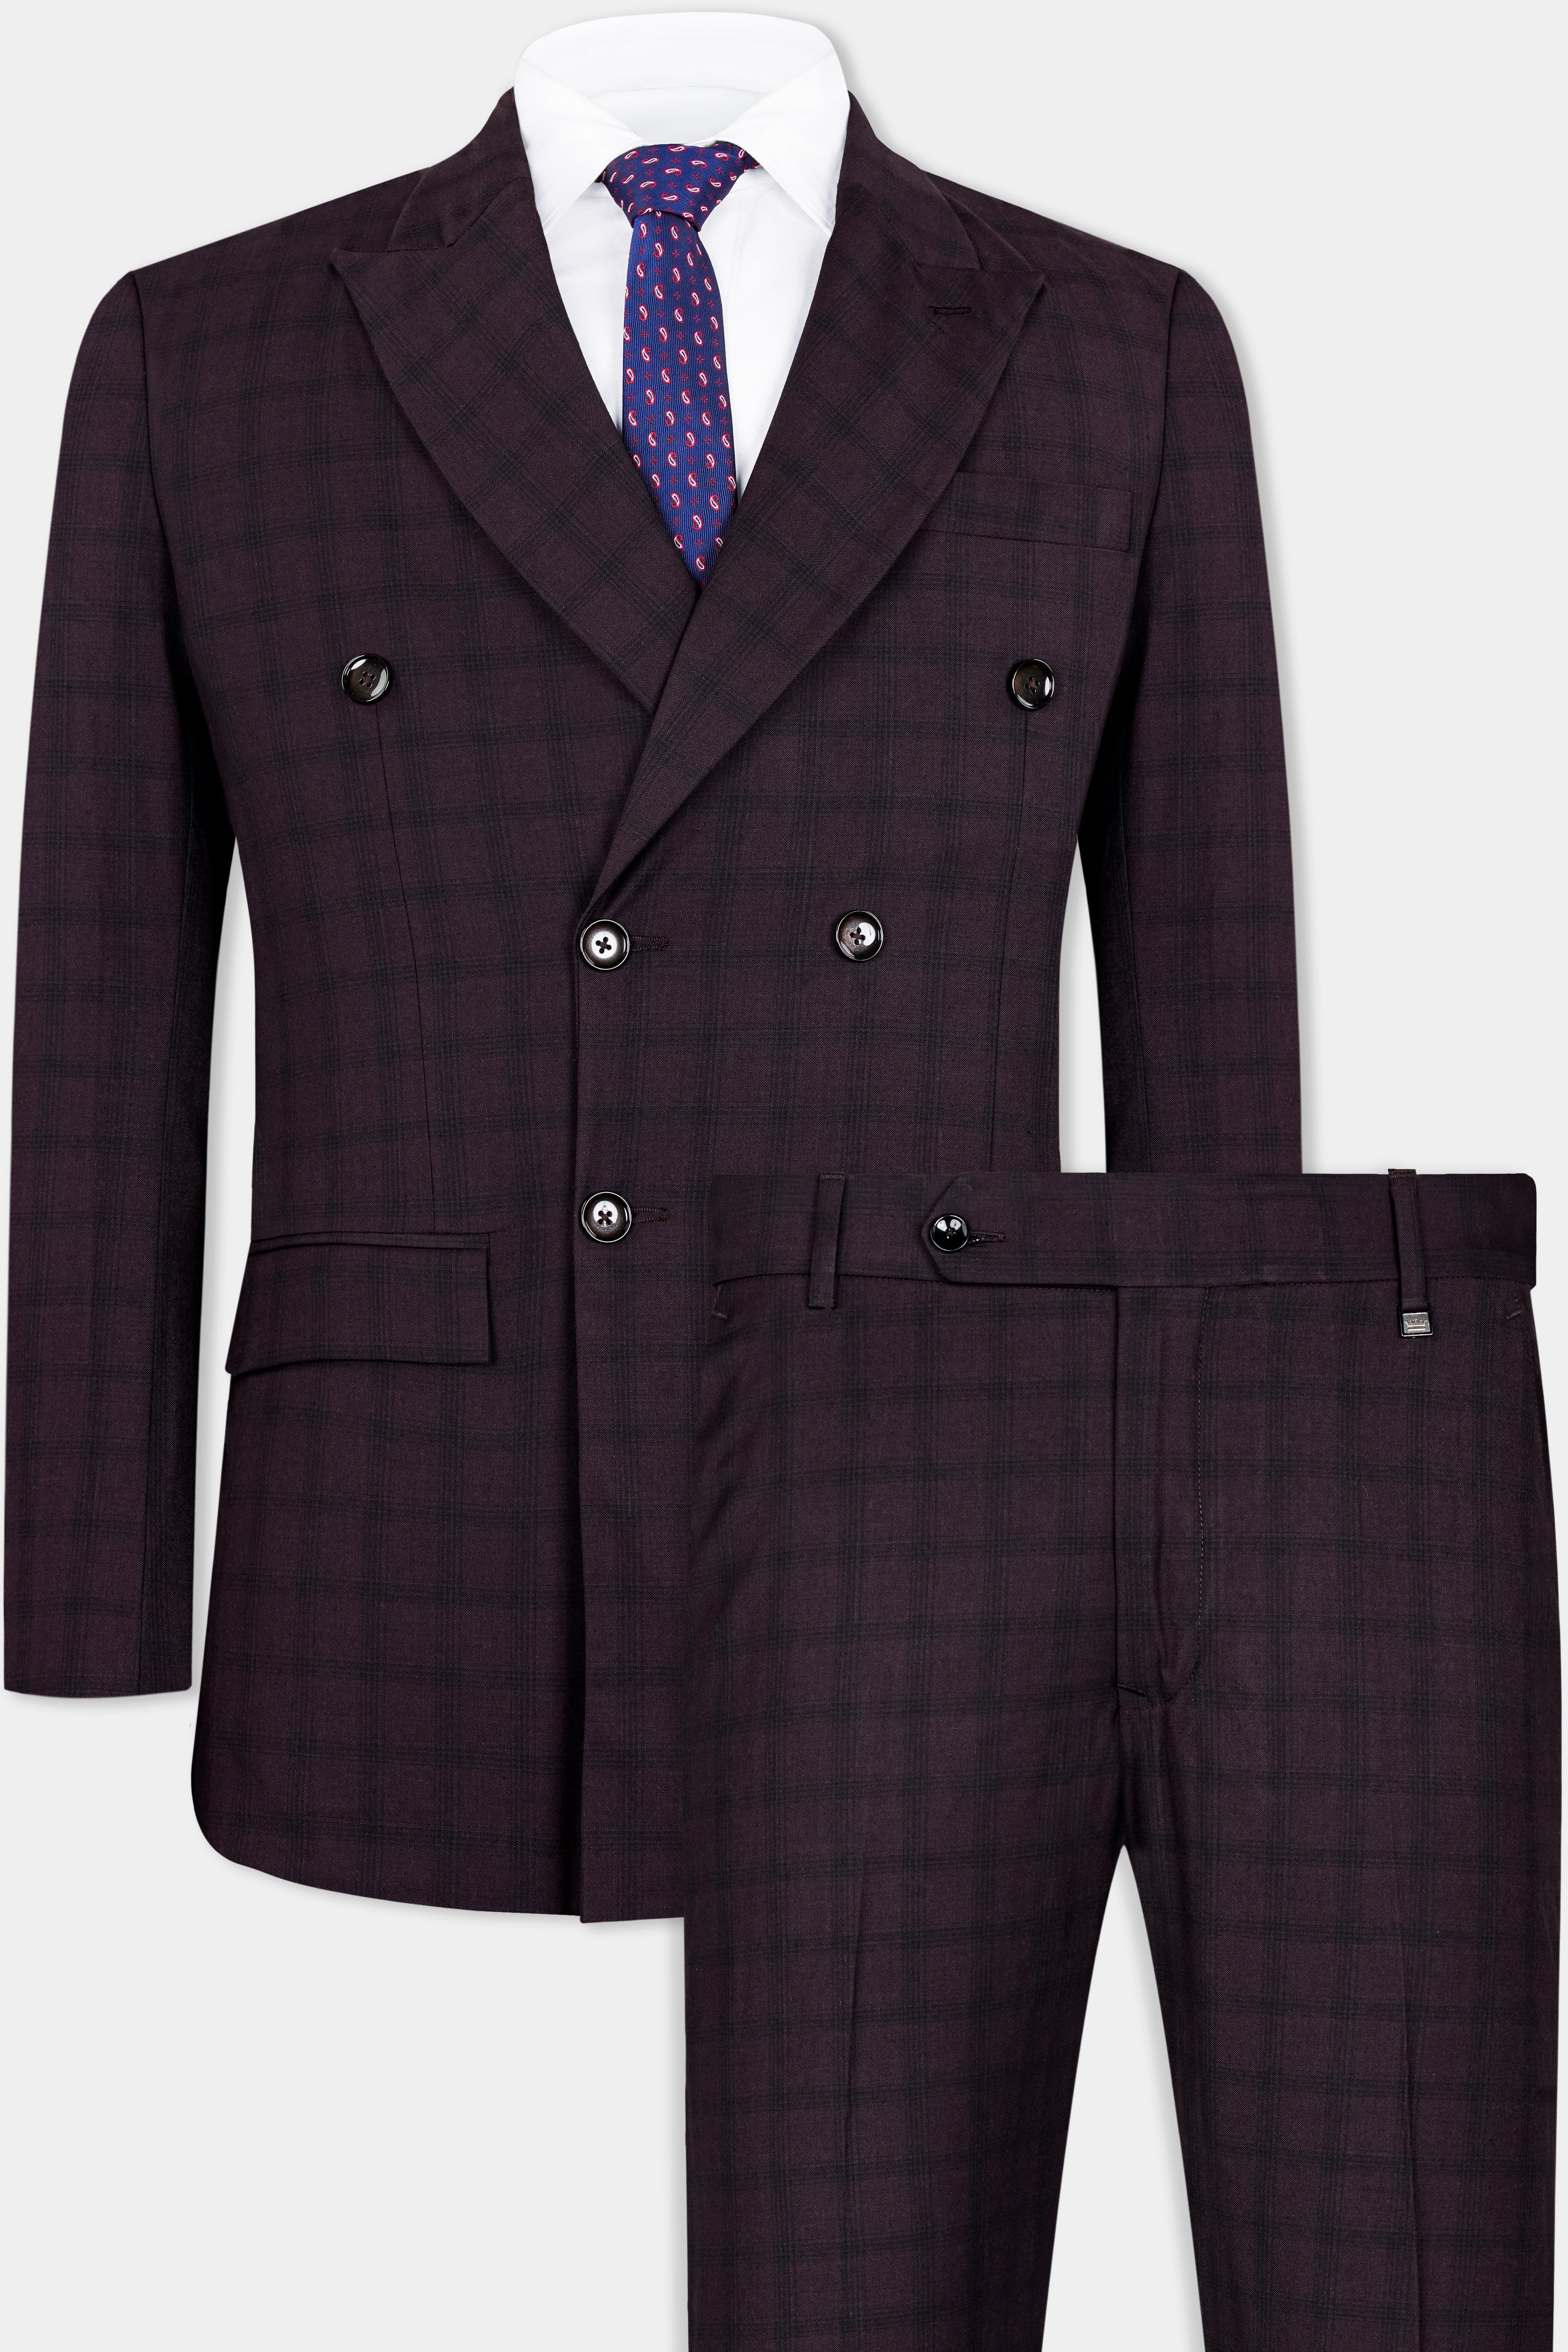 Cinder Purple Checkered Double Breasted Wool Rich Suit ST2916-DB-36, ST2916-DB-38, ST2916-DB-40, ST2916-DB-42, ST2916-DB-44, ST2916-DB-46, ST2916-DB-48, ST2916-DB-50, ST2916-DB-52, ST2916-DB-54, ST2916-DB-56, ST2916-DB-58, ST2916-DB-60